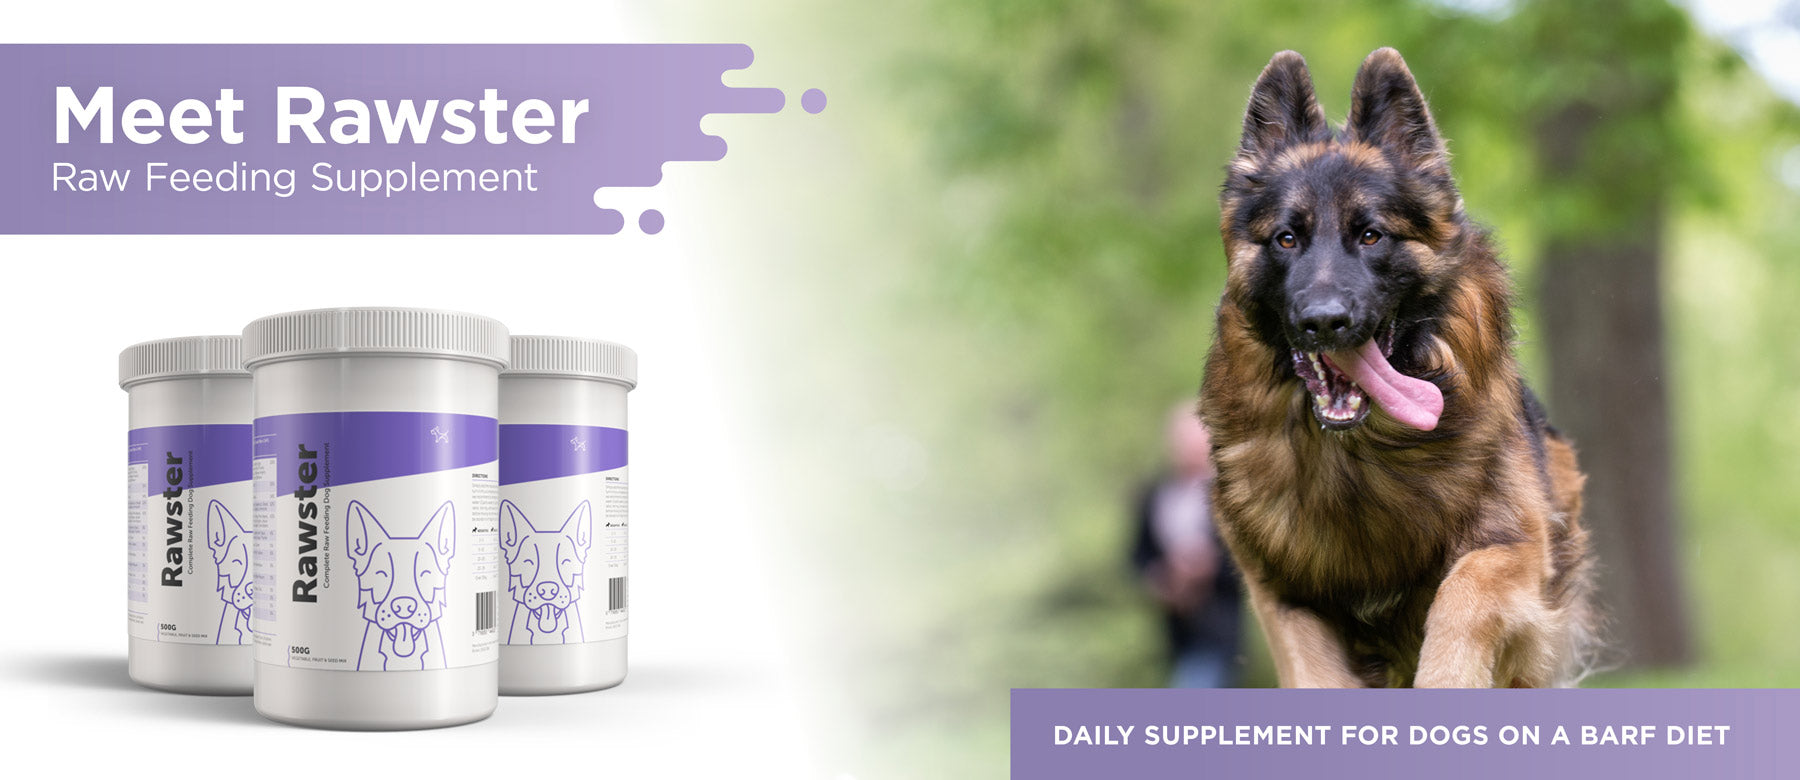 rawster supplement for dogs on barf diet